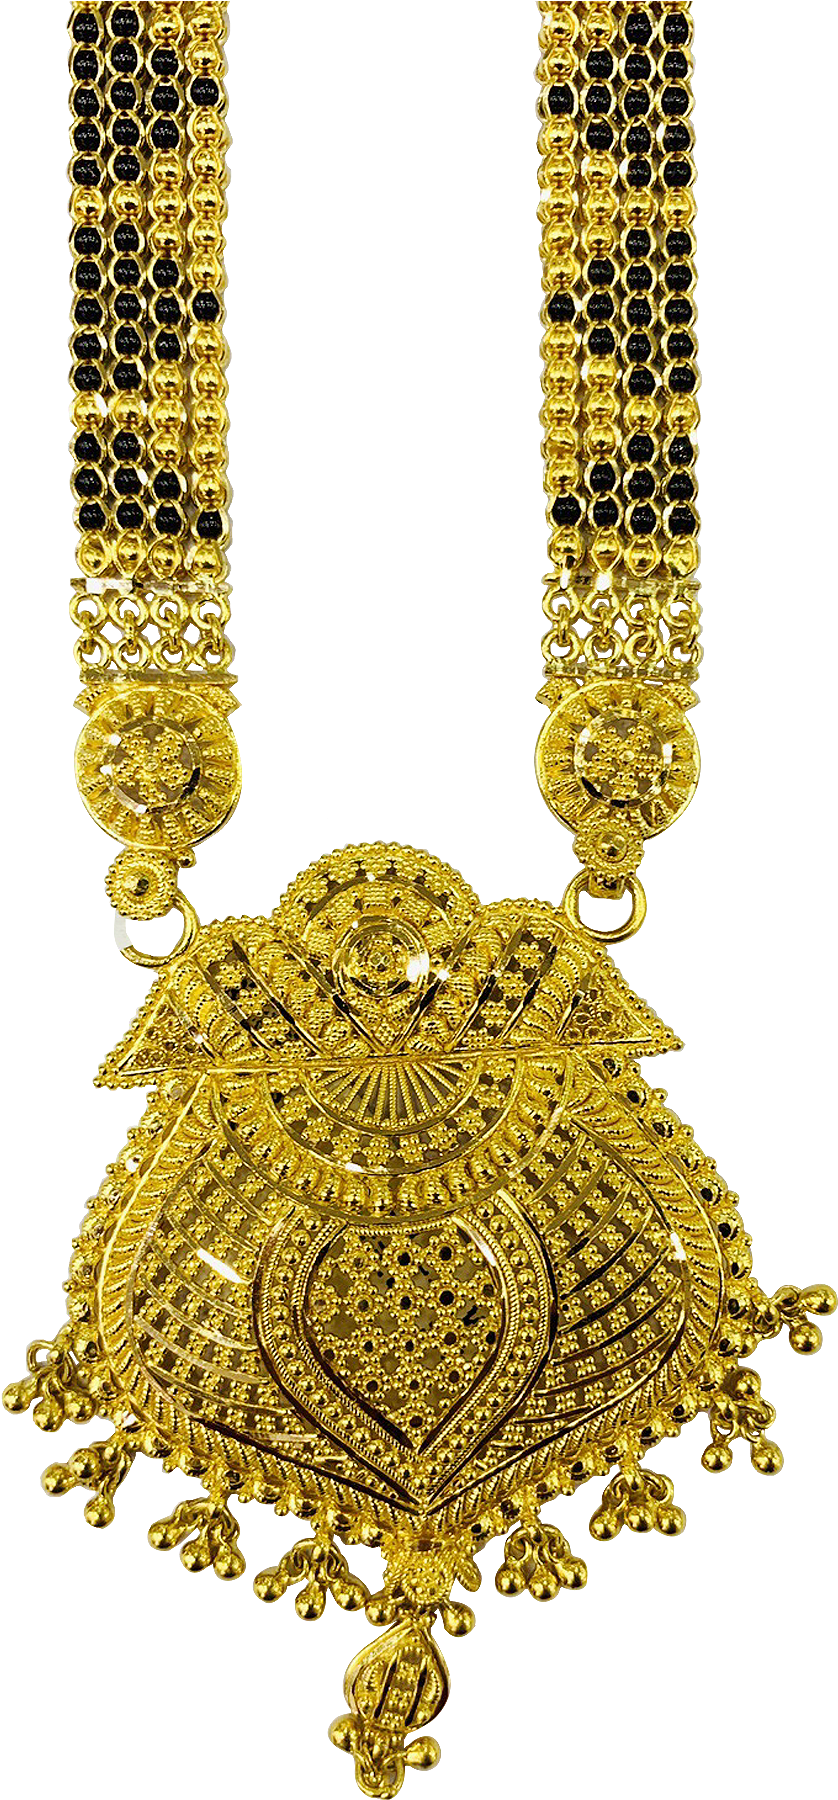 A Gold Necklace With Black And Gold Chains